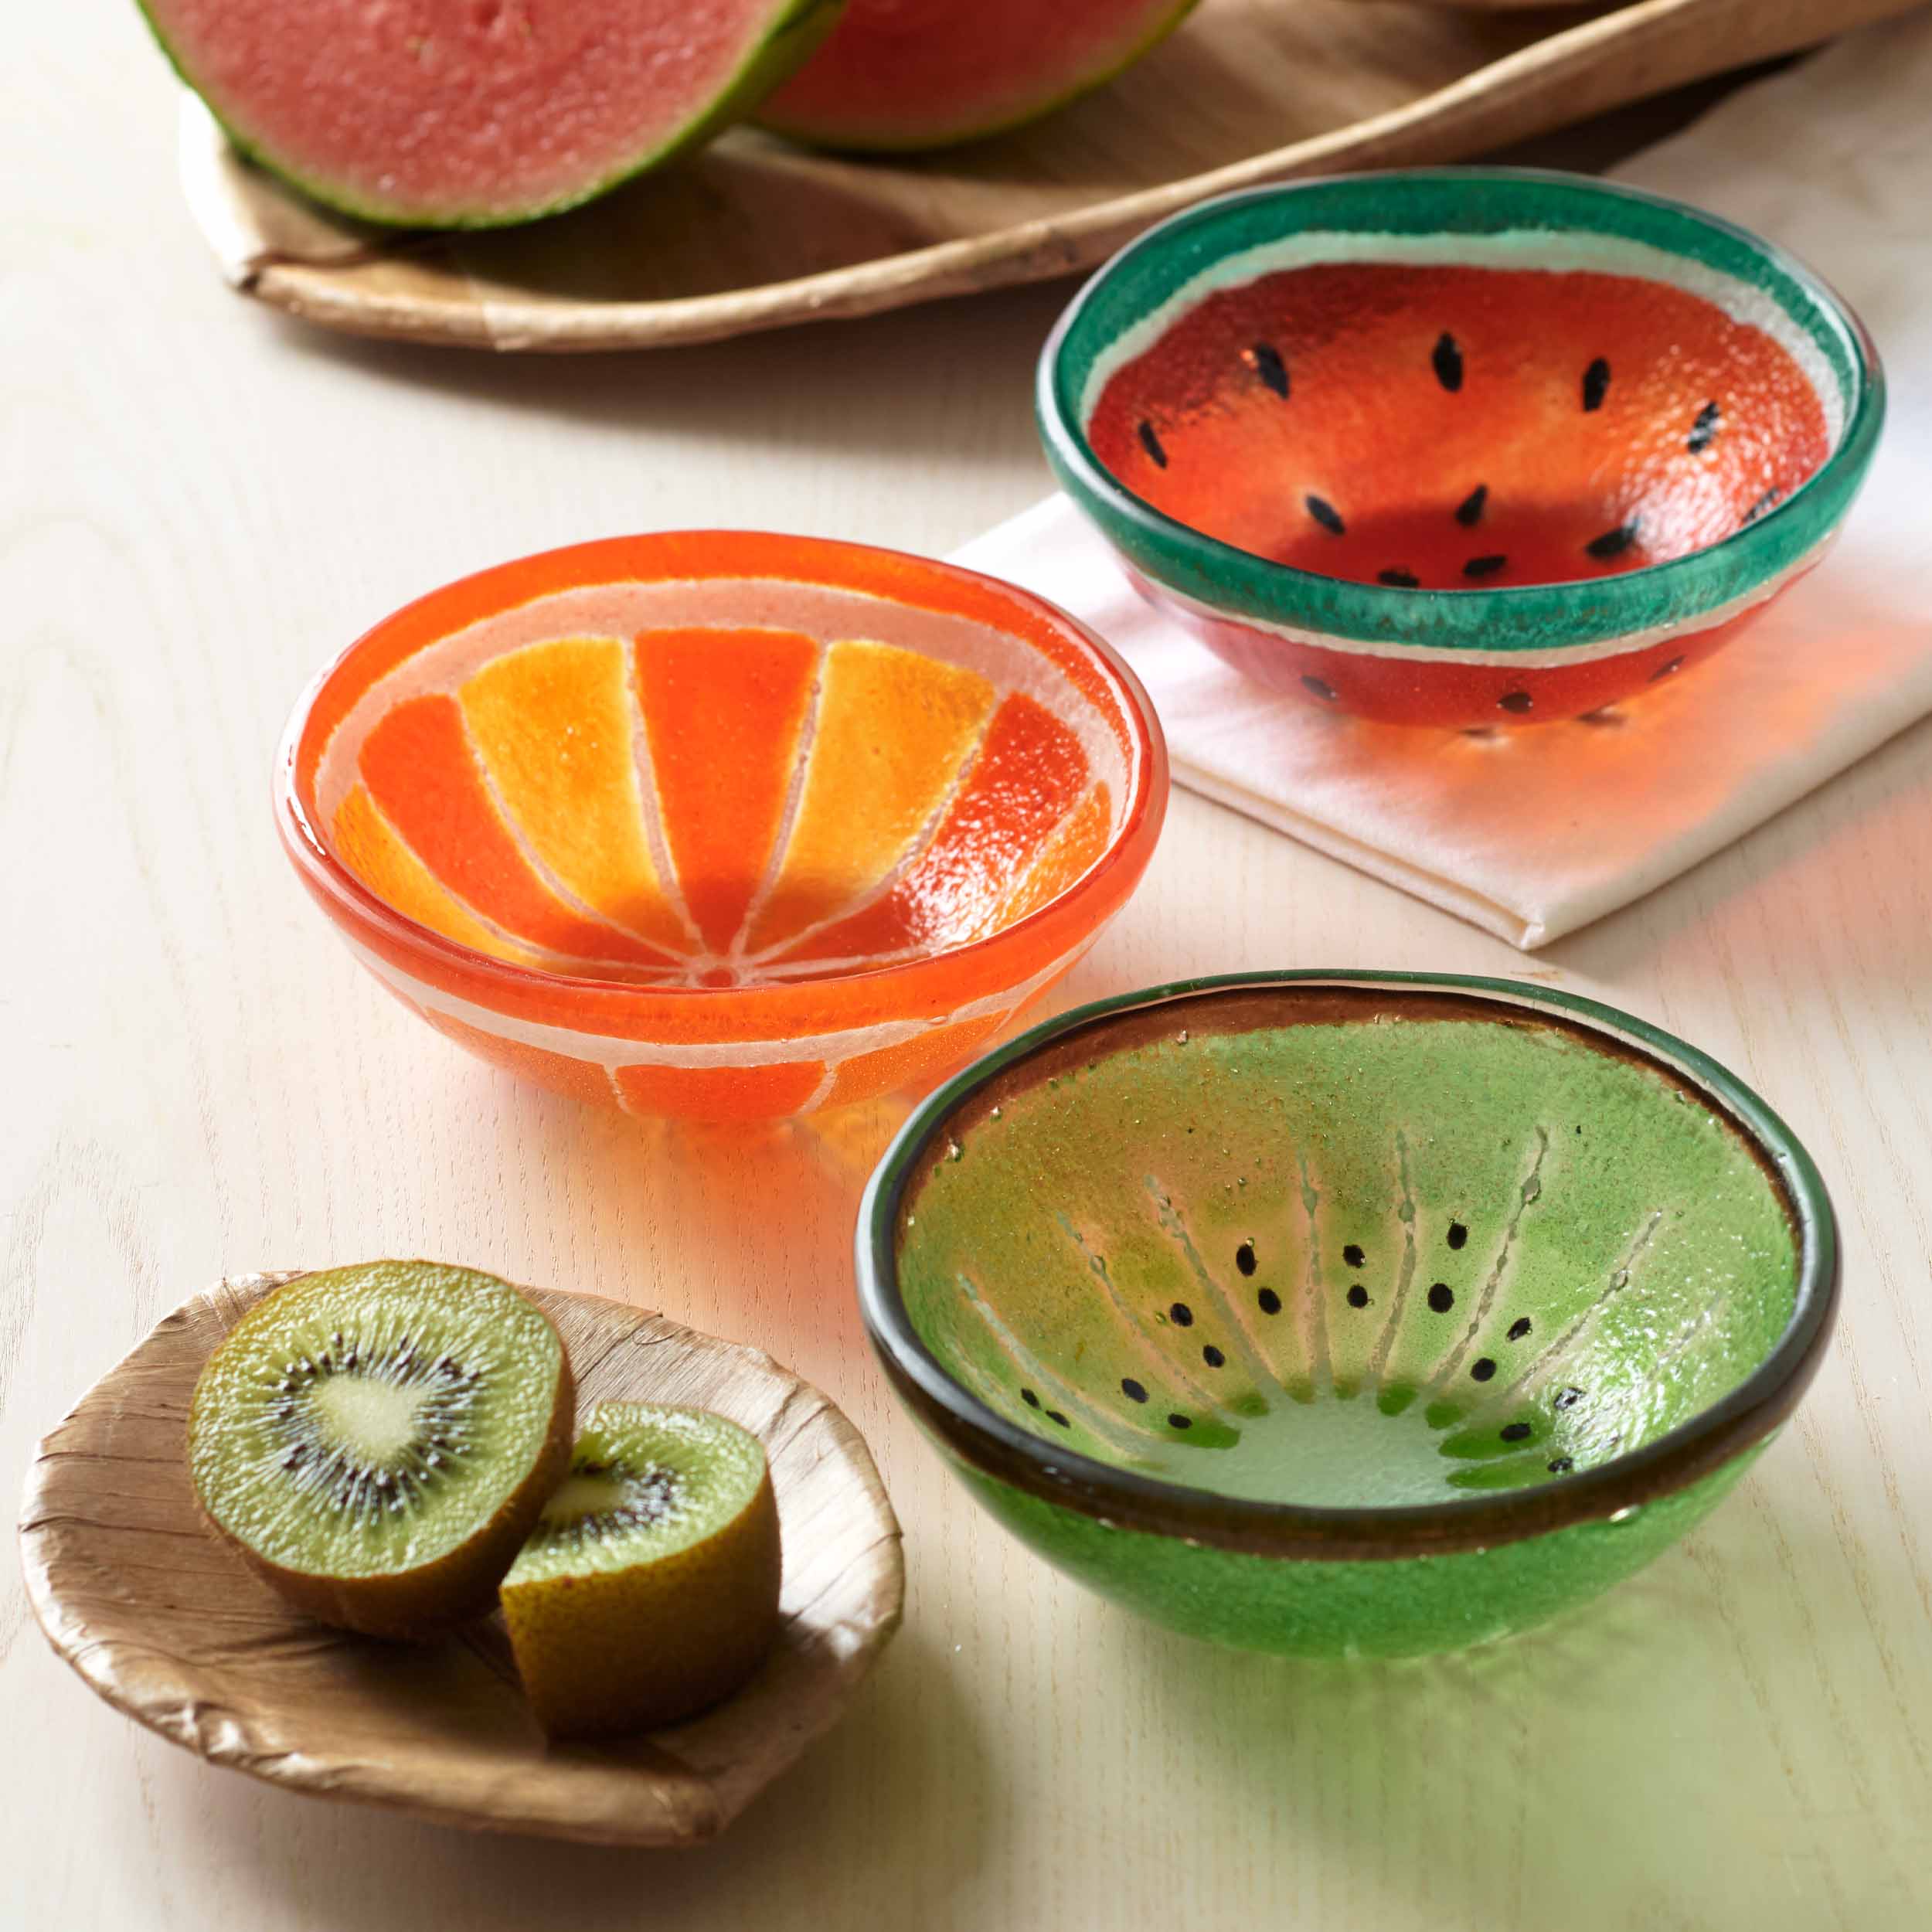 Papeete™ bowl - Orange | Image 3 | Premium Bowl from the Papeete collection | made with Glass for long lasting use | texxture